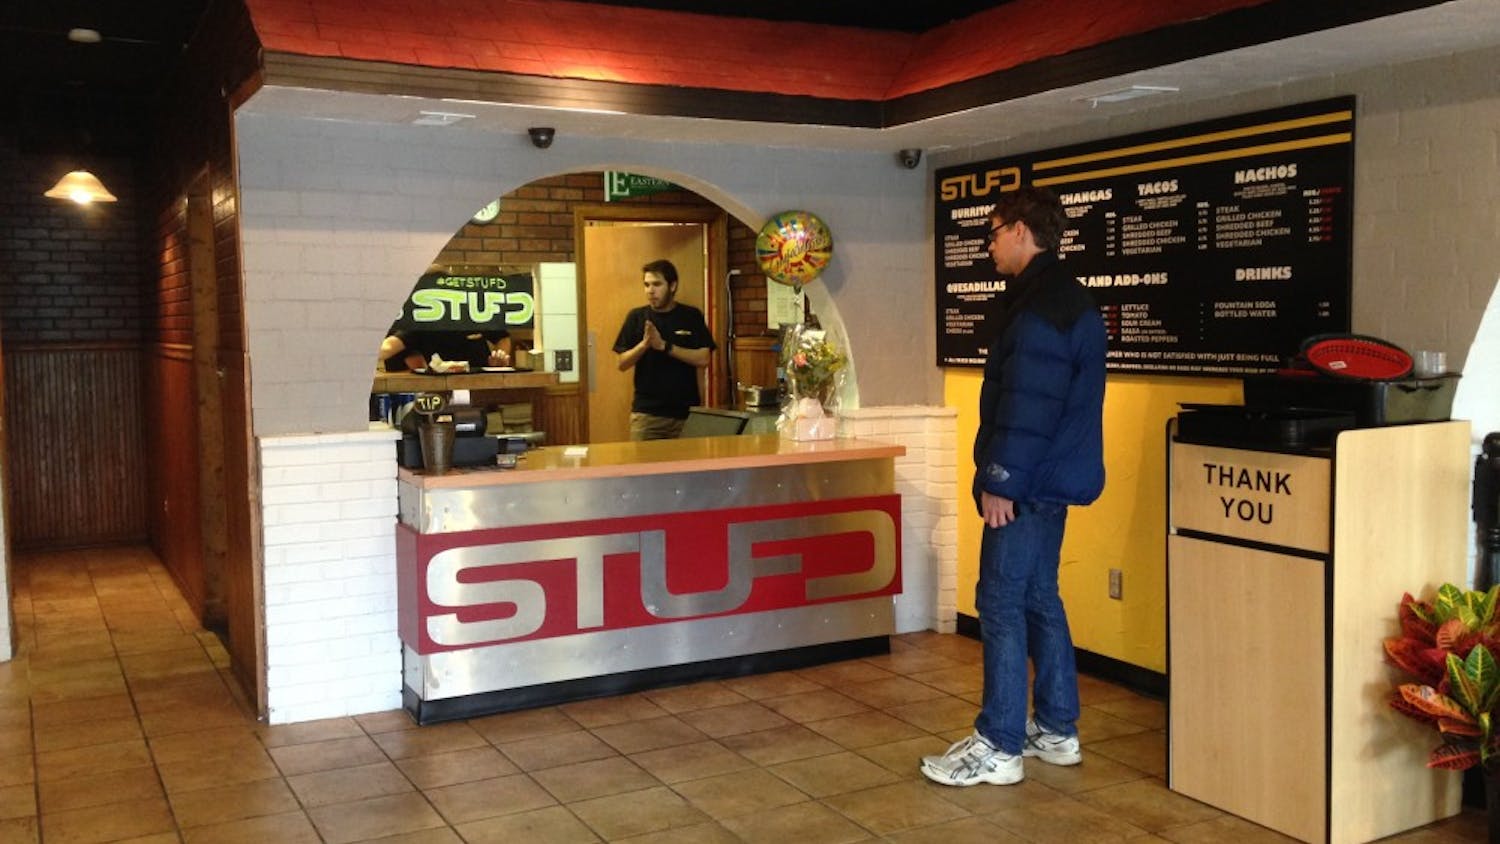 	STUFD offers quick, behind-the-counter service.